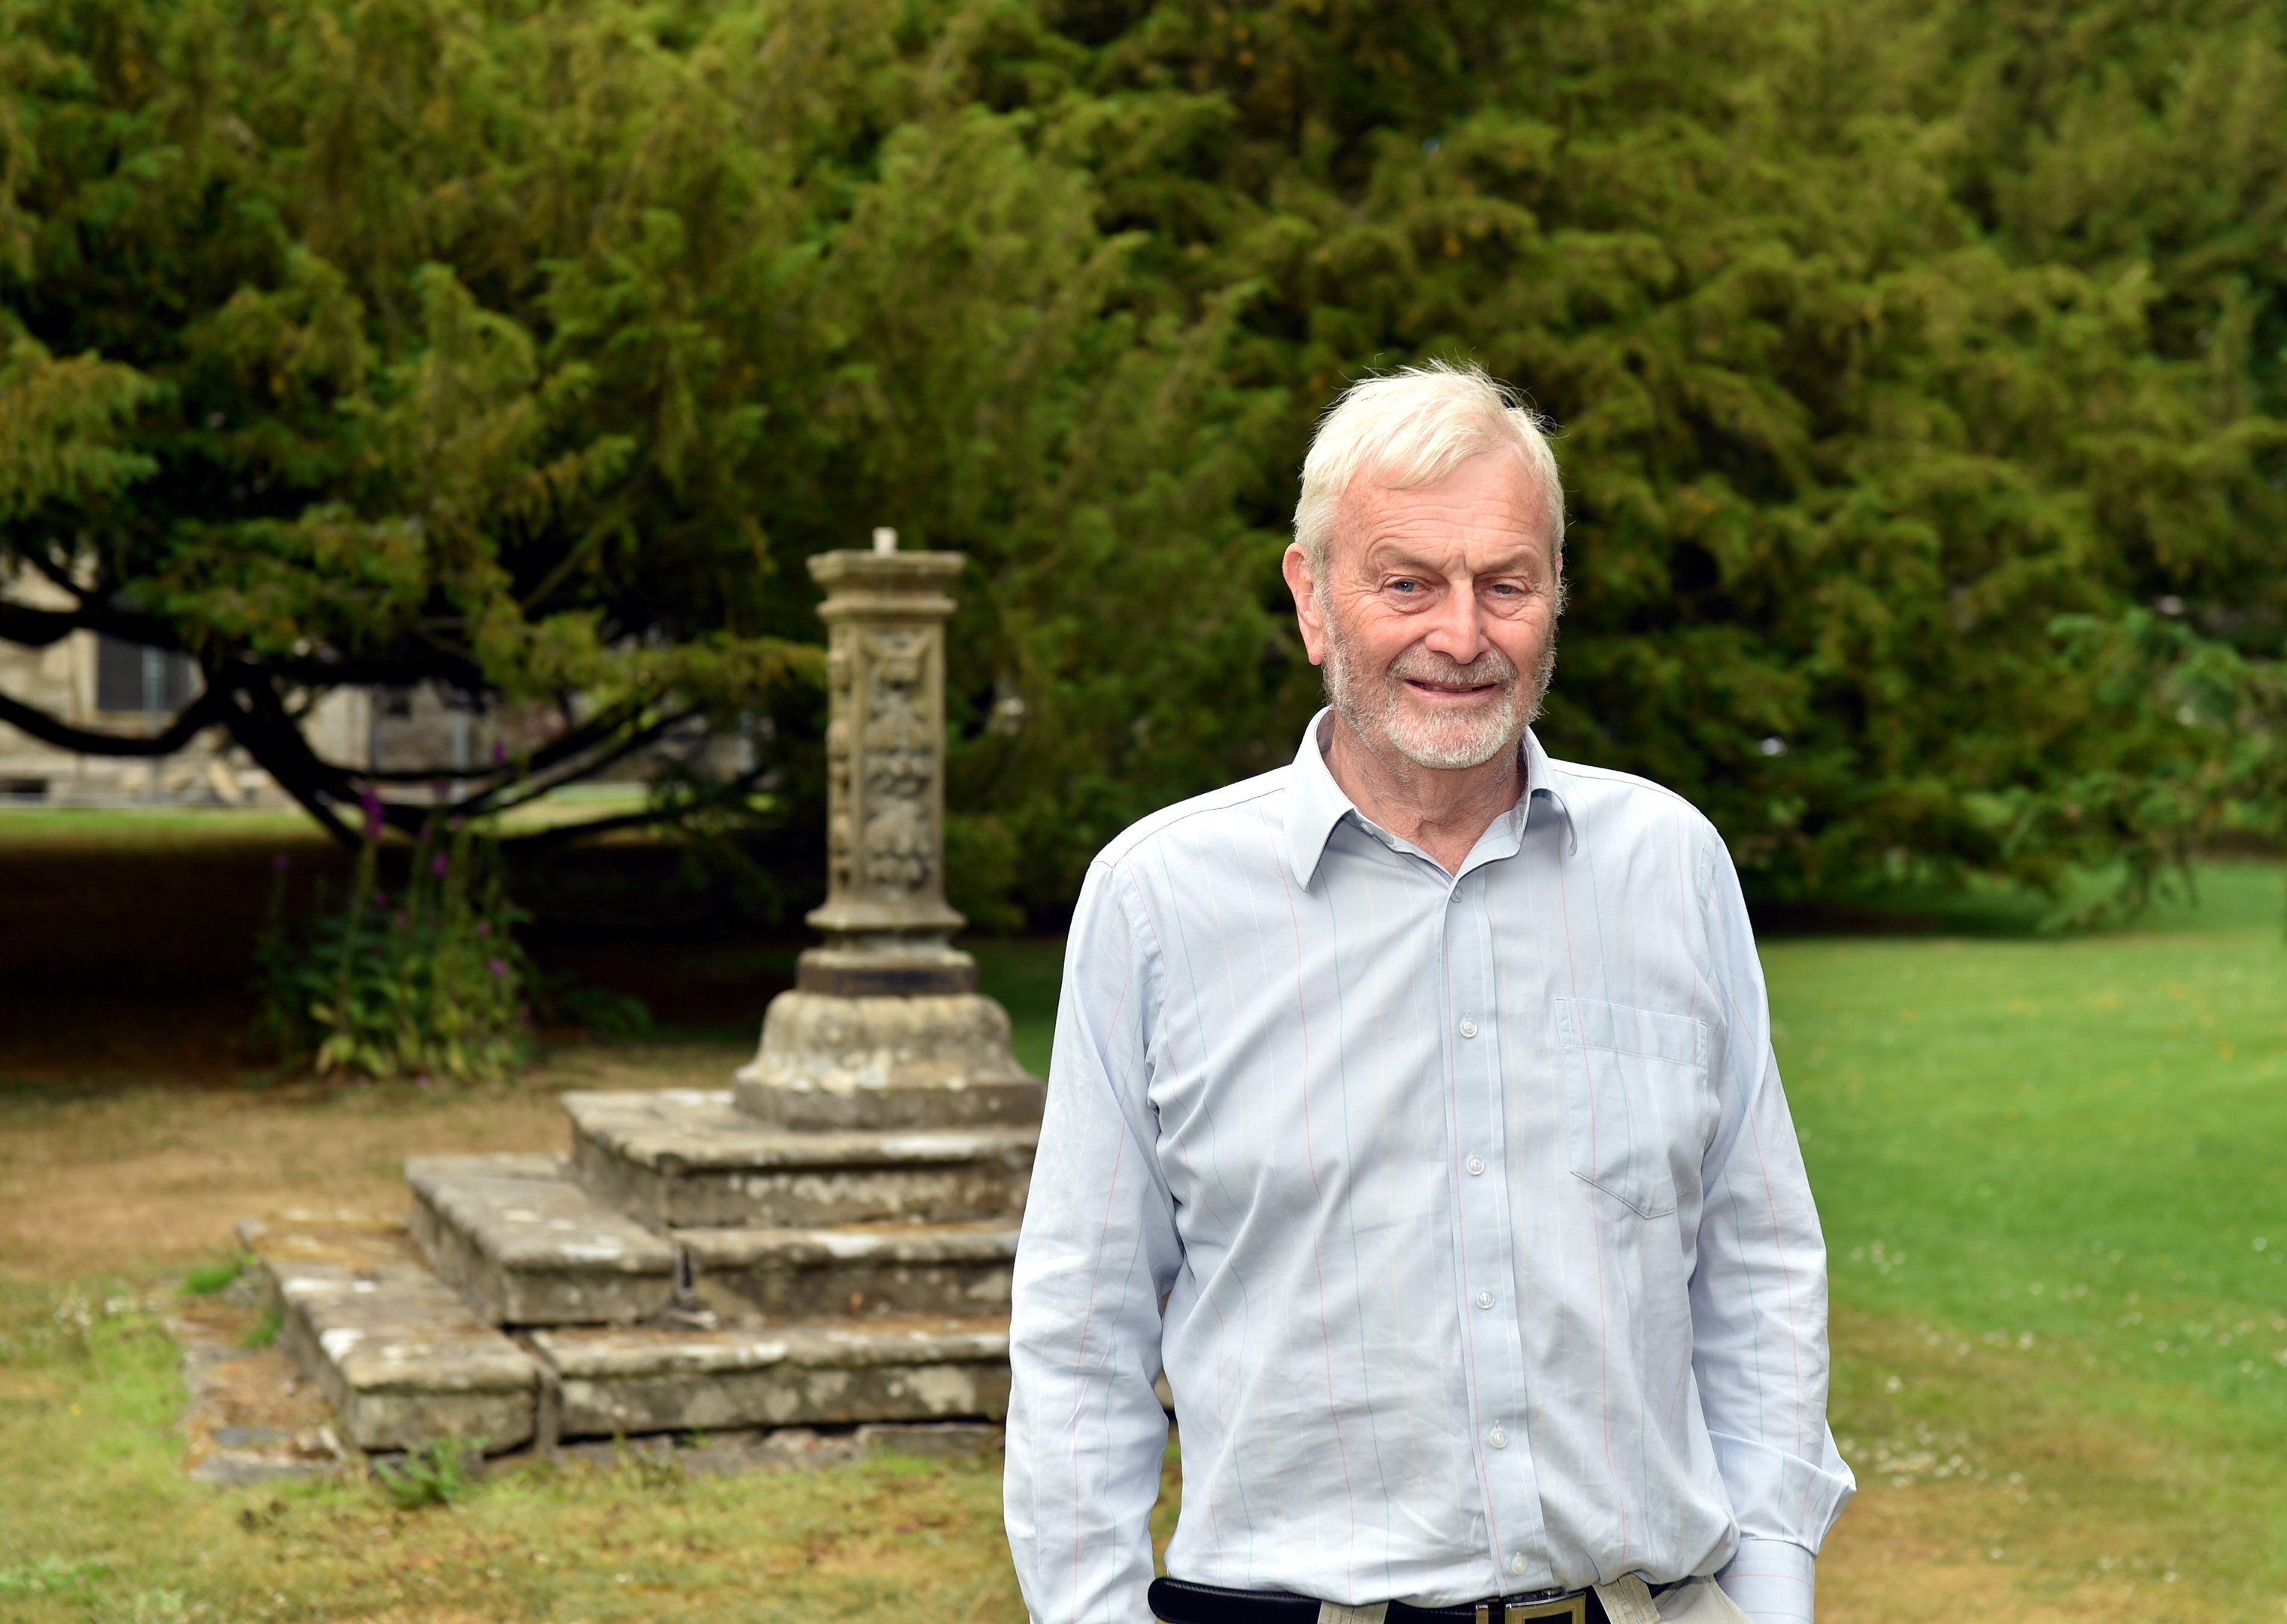 Alan Cameron, board member of the Ellon Gardens Castle Trust who have just been awarded funding by the Mushroom Trust to pay for the restoration of two 17th century sundials